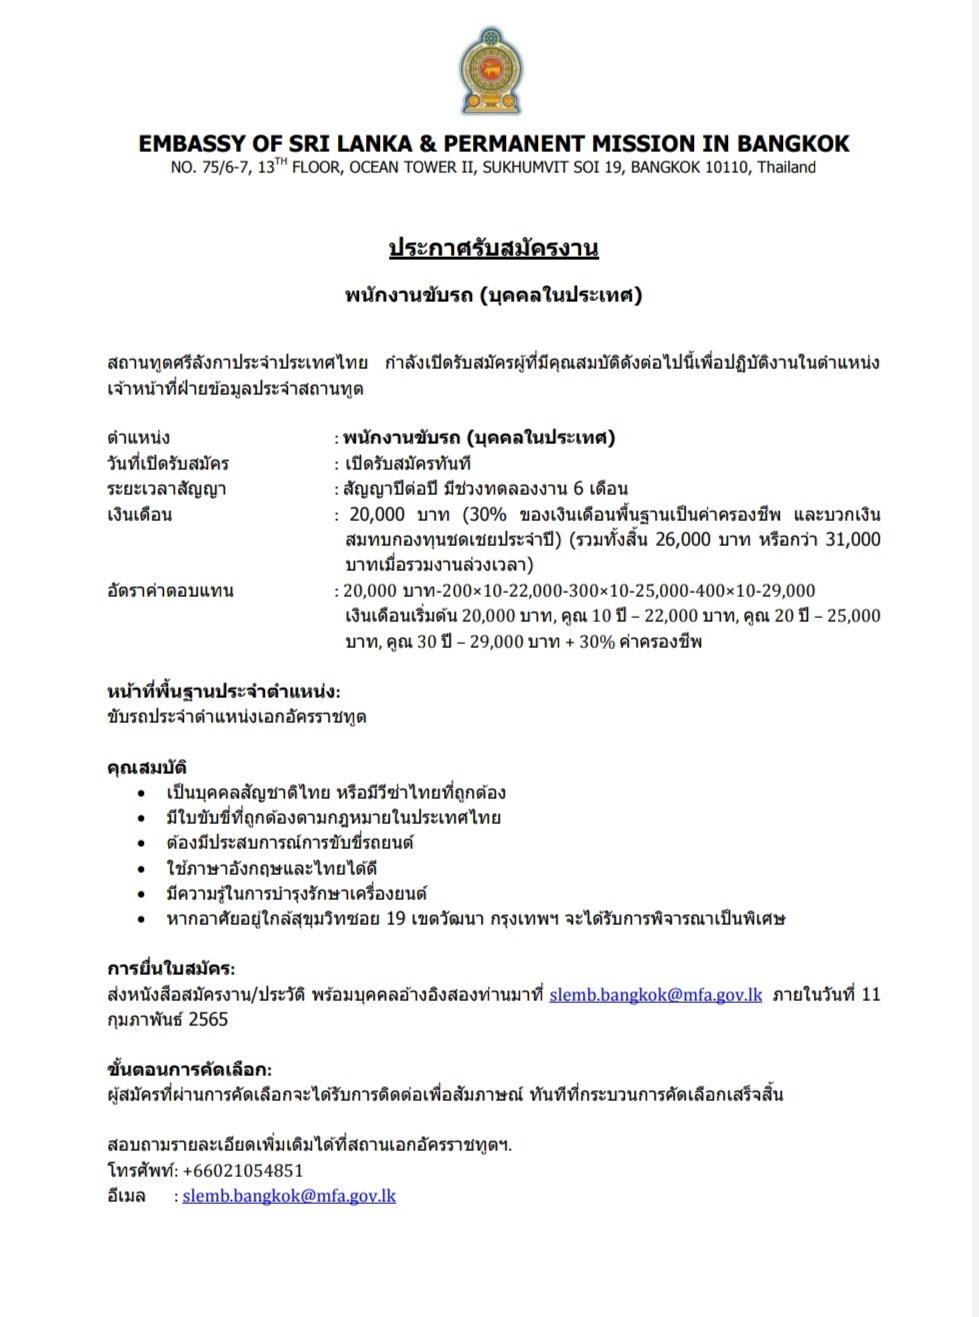 Embassy of Sri Lanka and Permanent Mission in Bangkok looks for qualified male applicants for the post of Chauffeur (Locally Recruited)